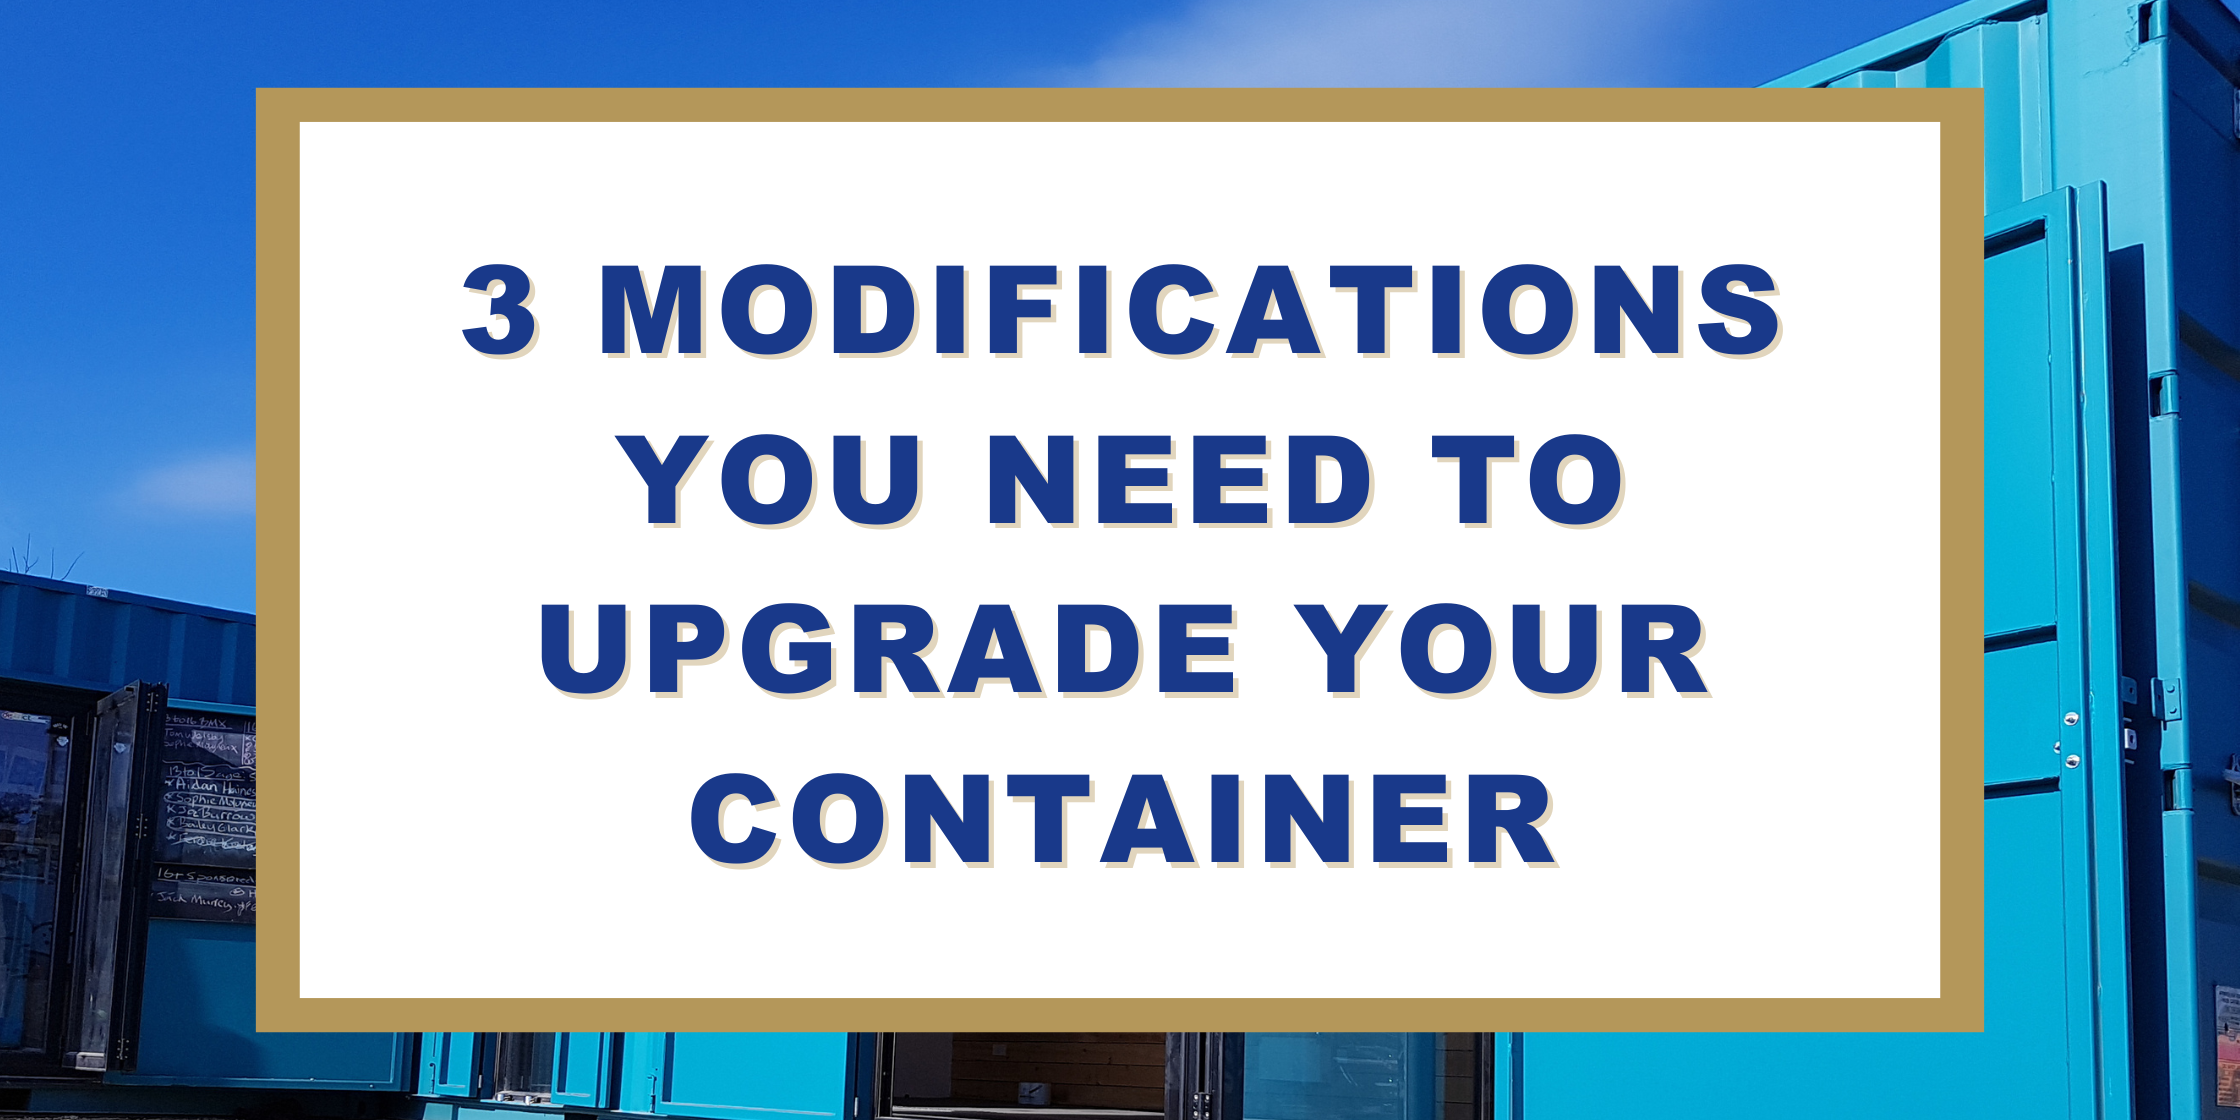 3 Modifications You Need To Upgrade Your Container